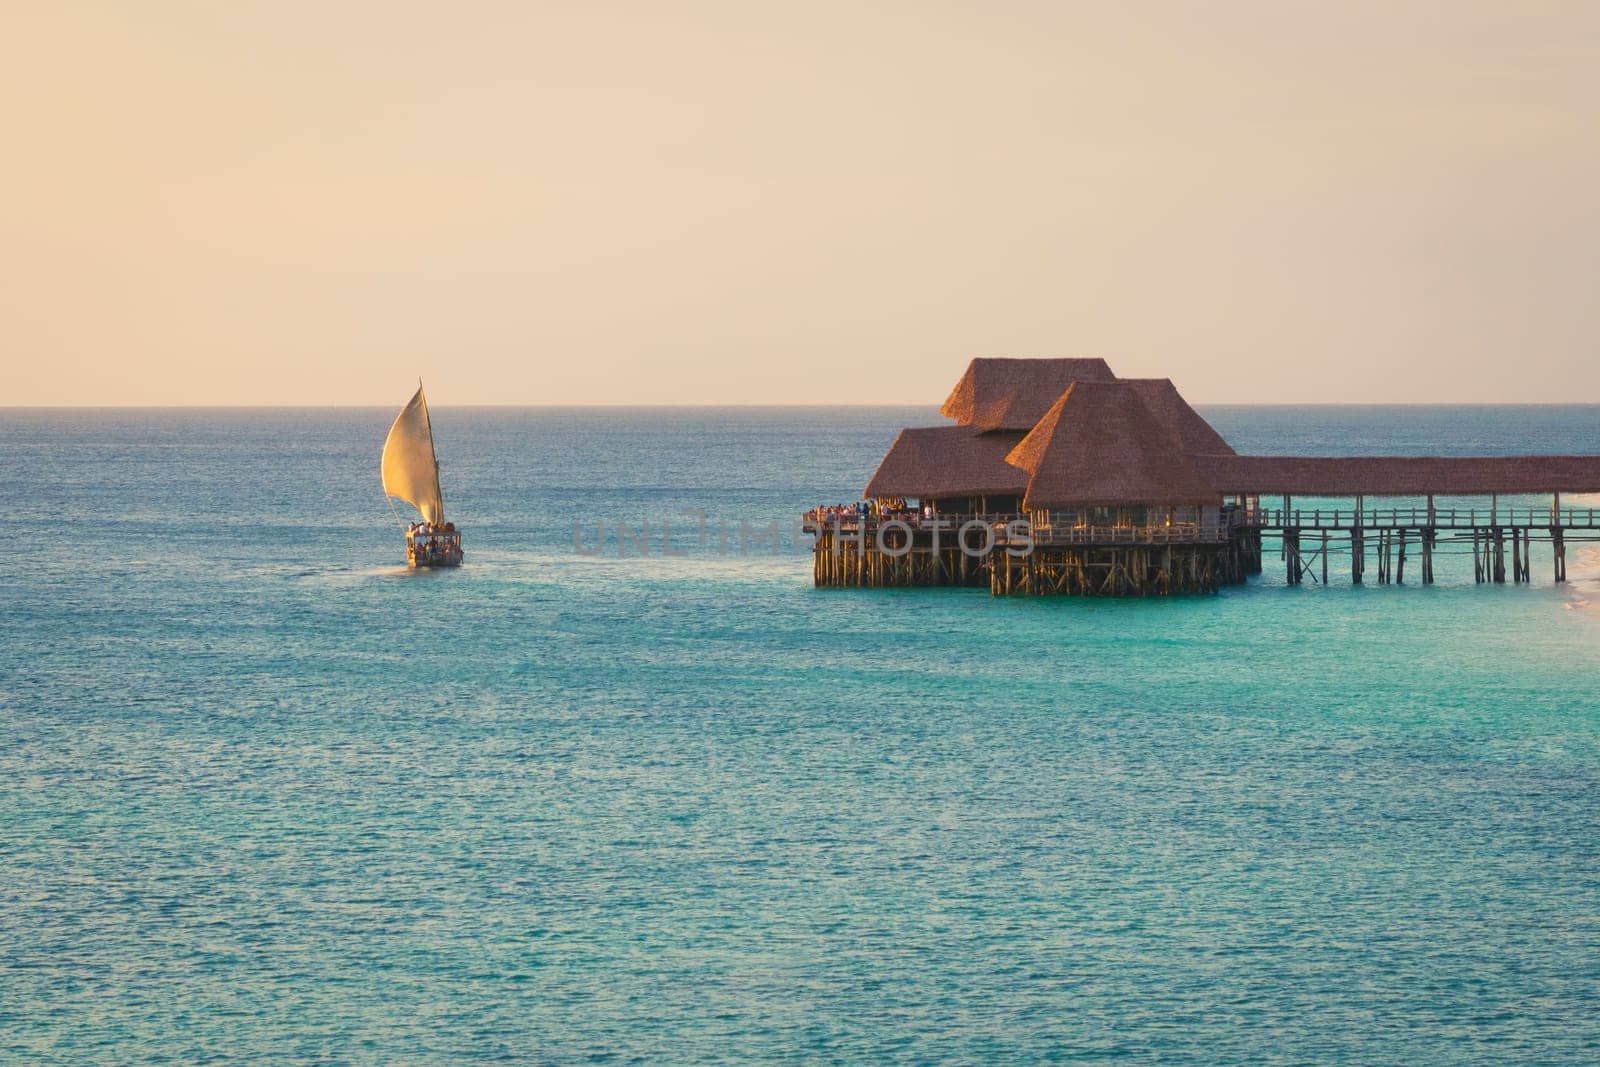 Dhow boat sails in the ocean near beautiful thatch stilt house restaurant at sunset by Robertobinetti70